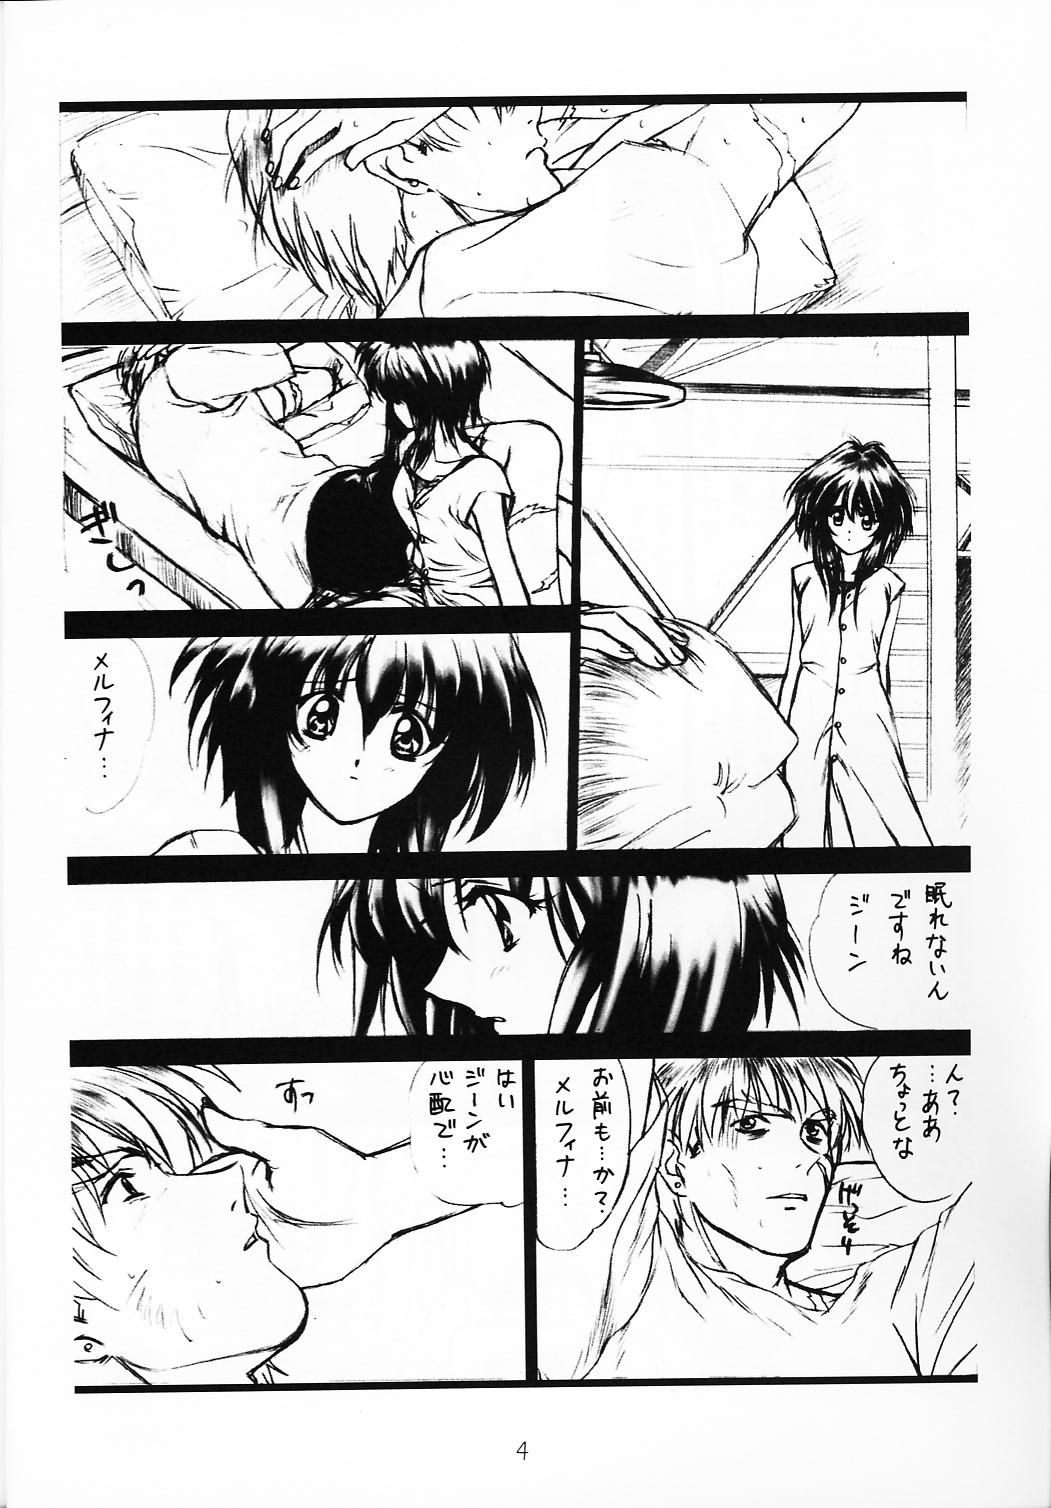 Bro voguish I OUTLAW STAR - Outlaw star Tiny - Page 3